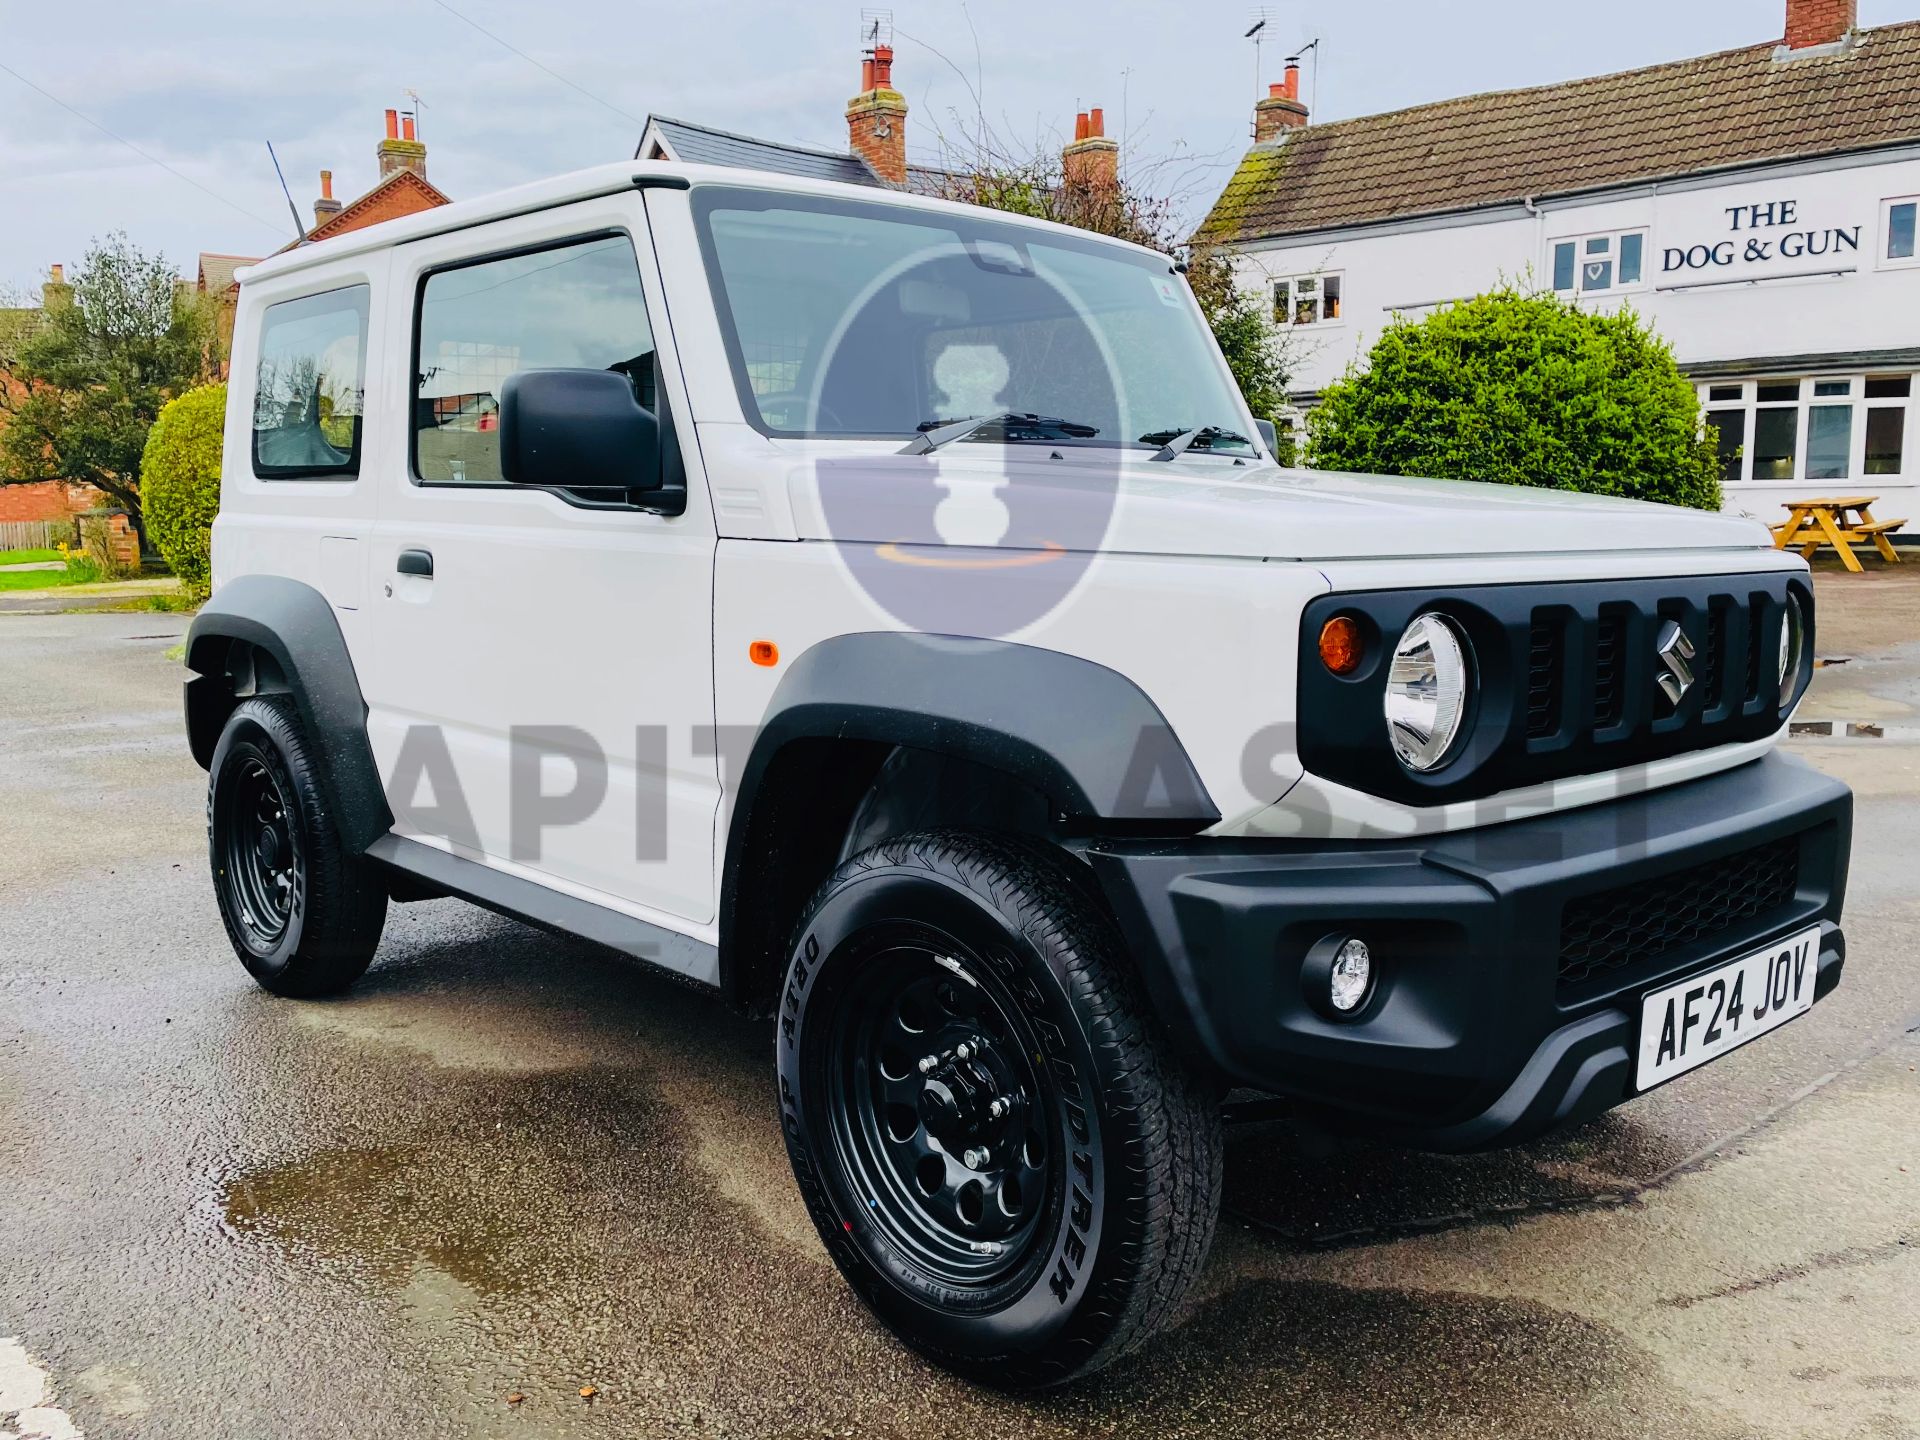 (ON SALE) SUZUKI JIMNY ALLGRIP (24 REG - BRAND NEW) DELIVERY MILEAGE ONLY - BEAT THE WAITING LIST